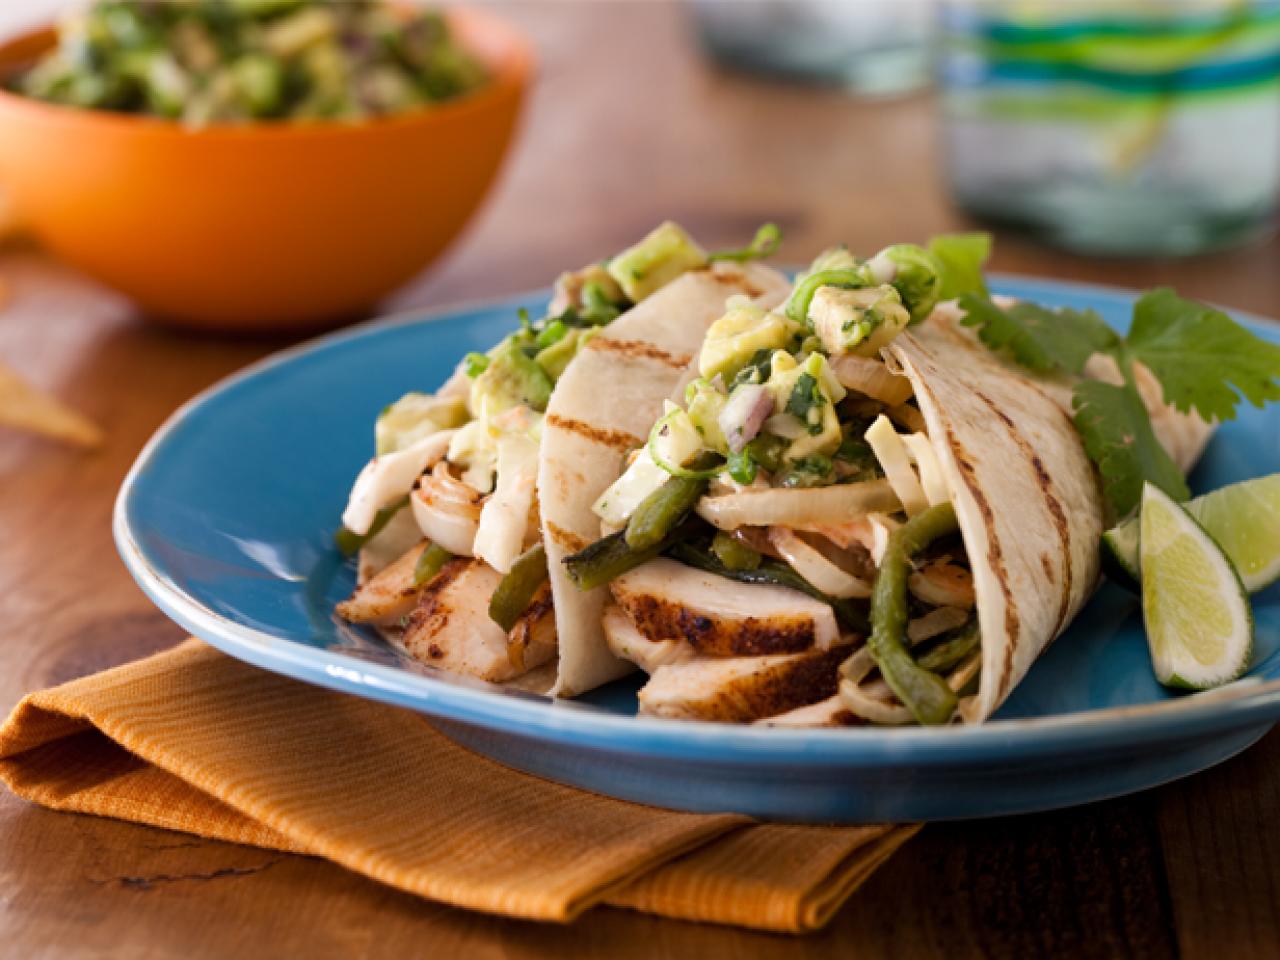 Bobby Flay's Spice-Rubbed Chicken Breast Tacos Recipe | FN ...